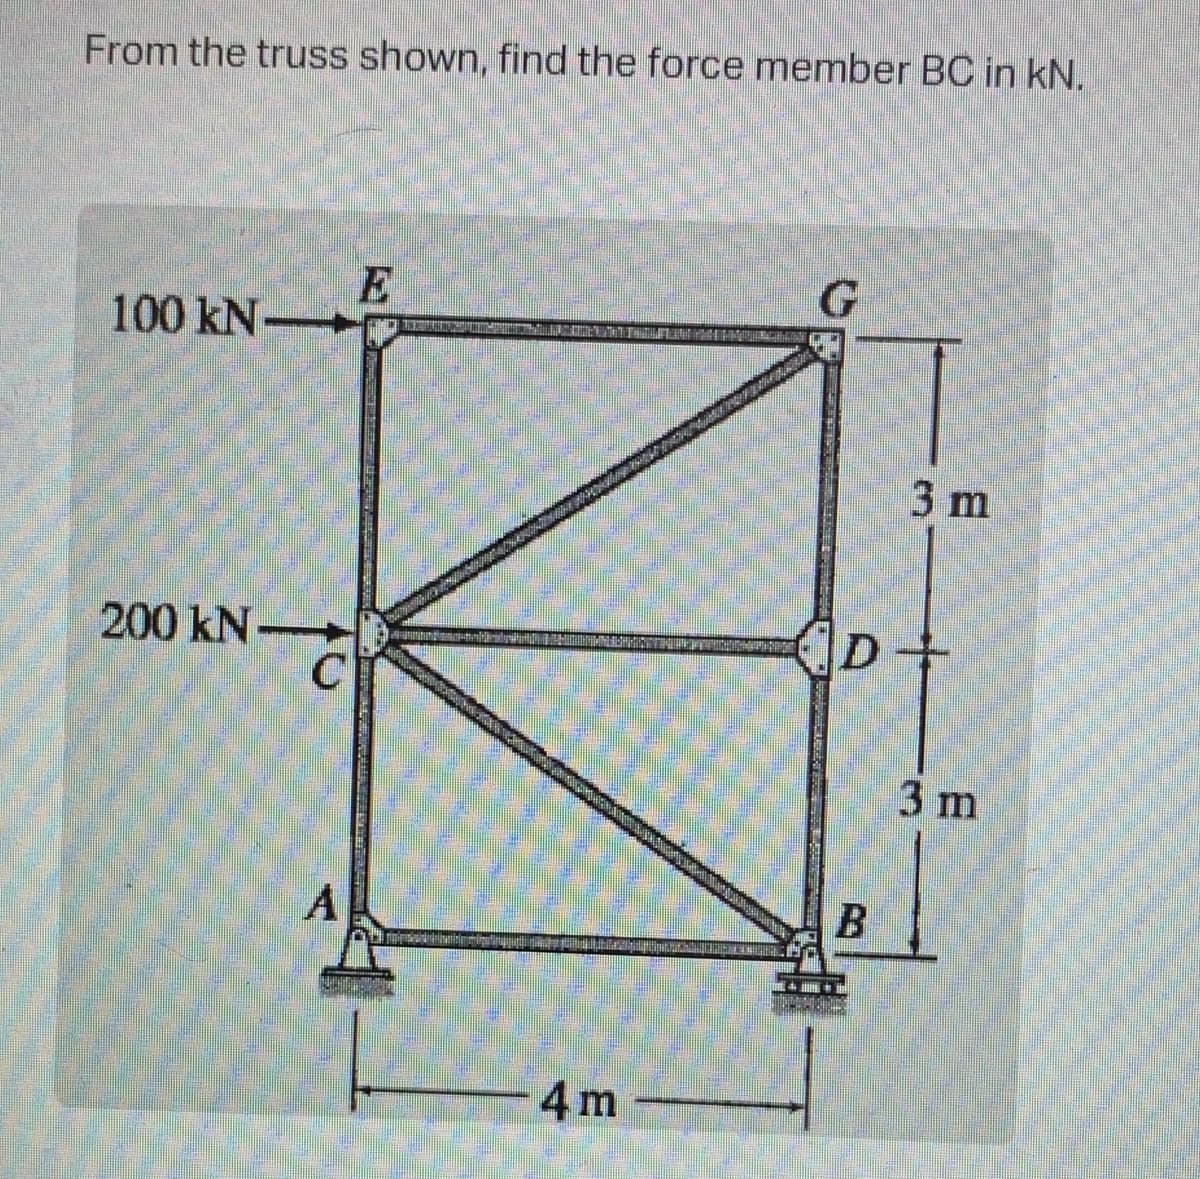 From the truss shown, find the force member BC in kN,
100 kN-
3 m
200 kN
D+
3 m
A
4 m
